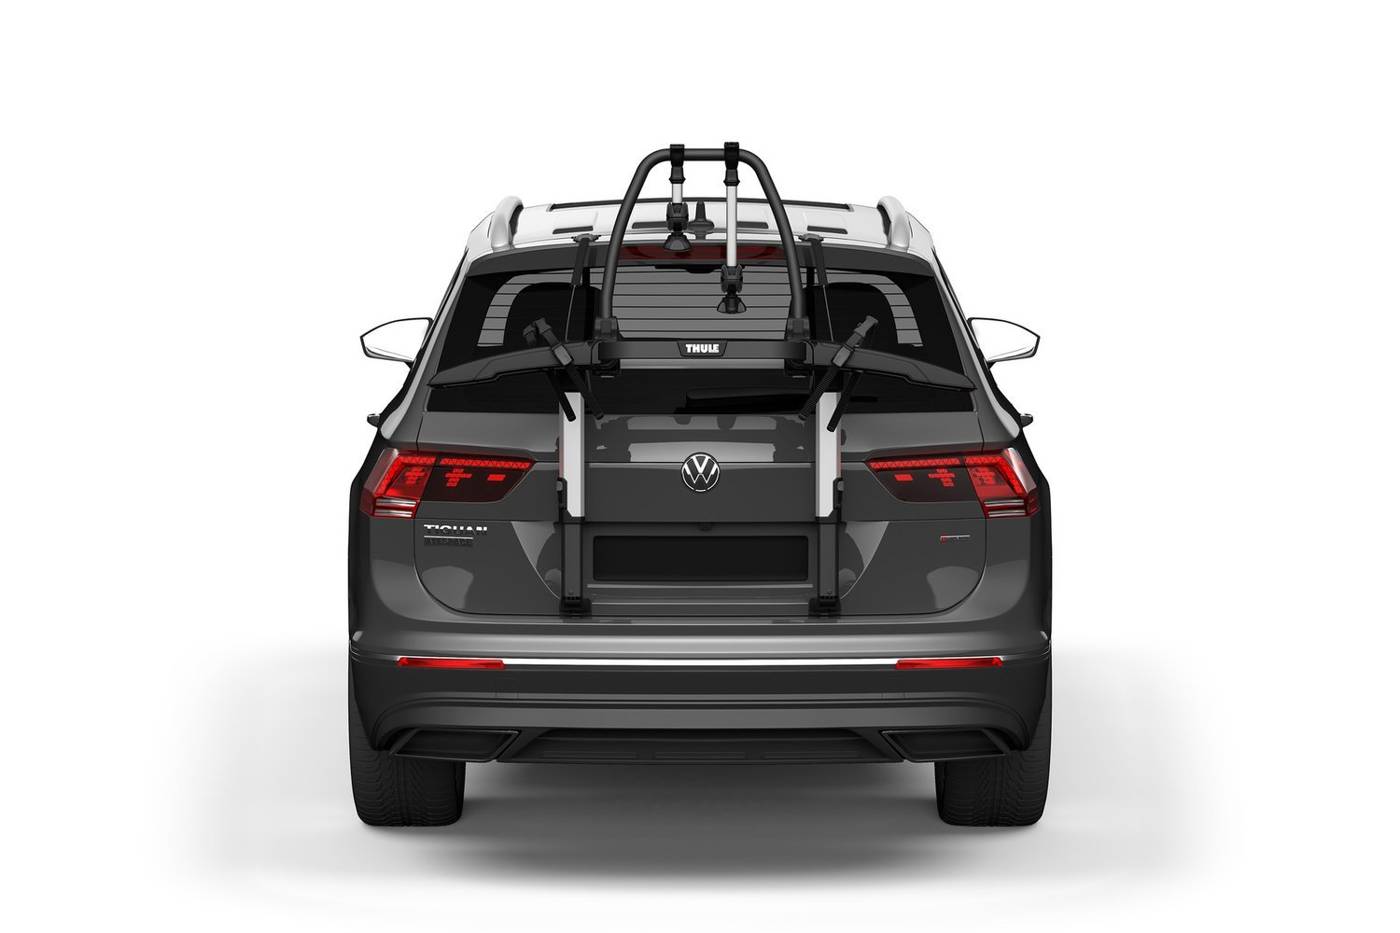 Thule OutWay 993 VOLVO XC90 II 2015-